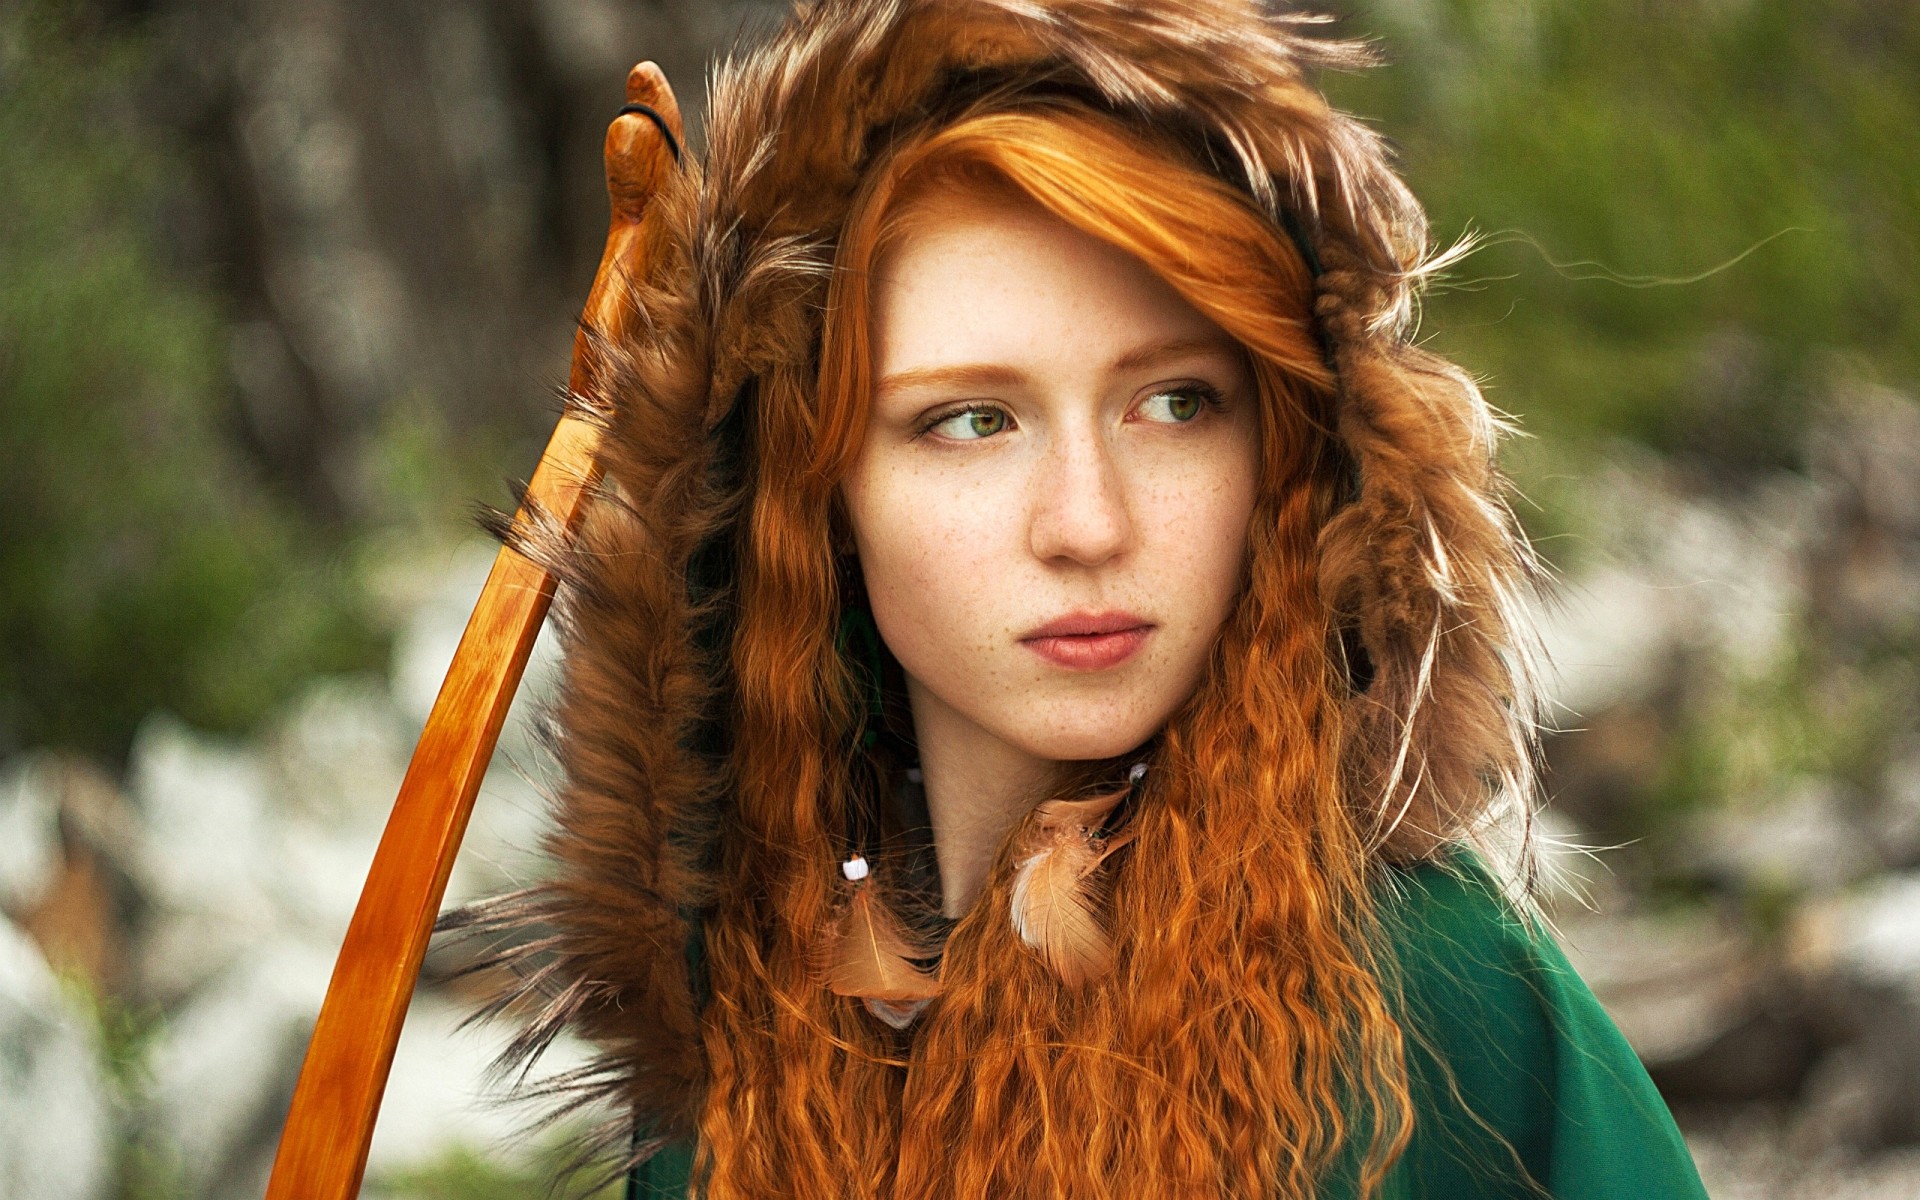 People 1920x1200 women model redhead long hair curly hair face women outdoors green eyes freckles fur coats bow feathers archery Princess Merida fantasy girl looking away